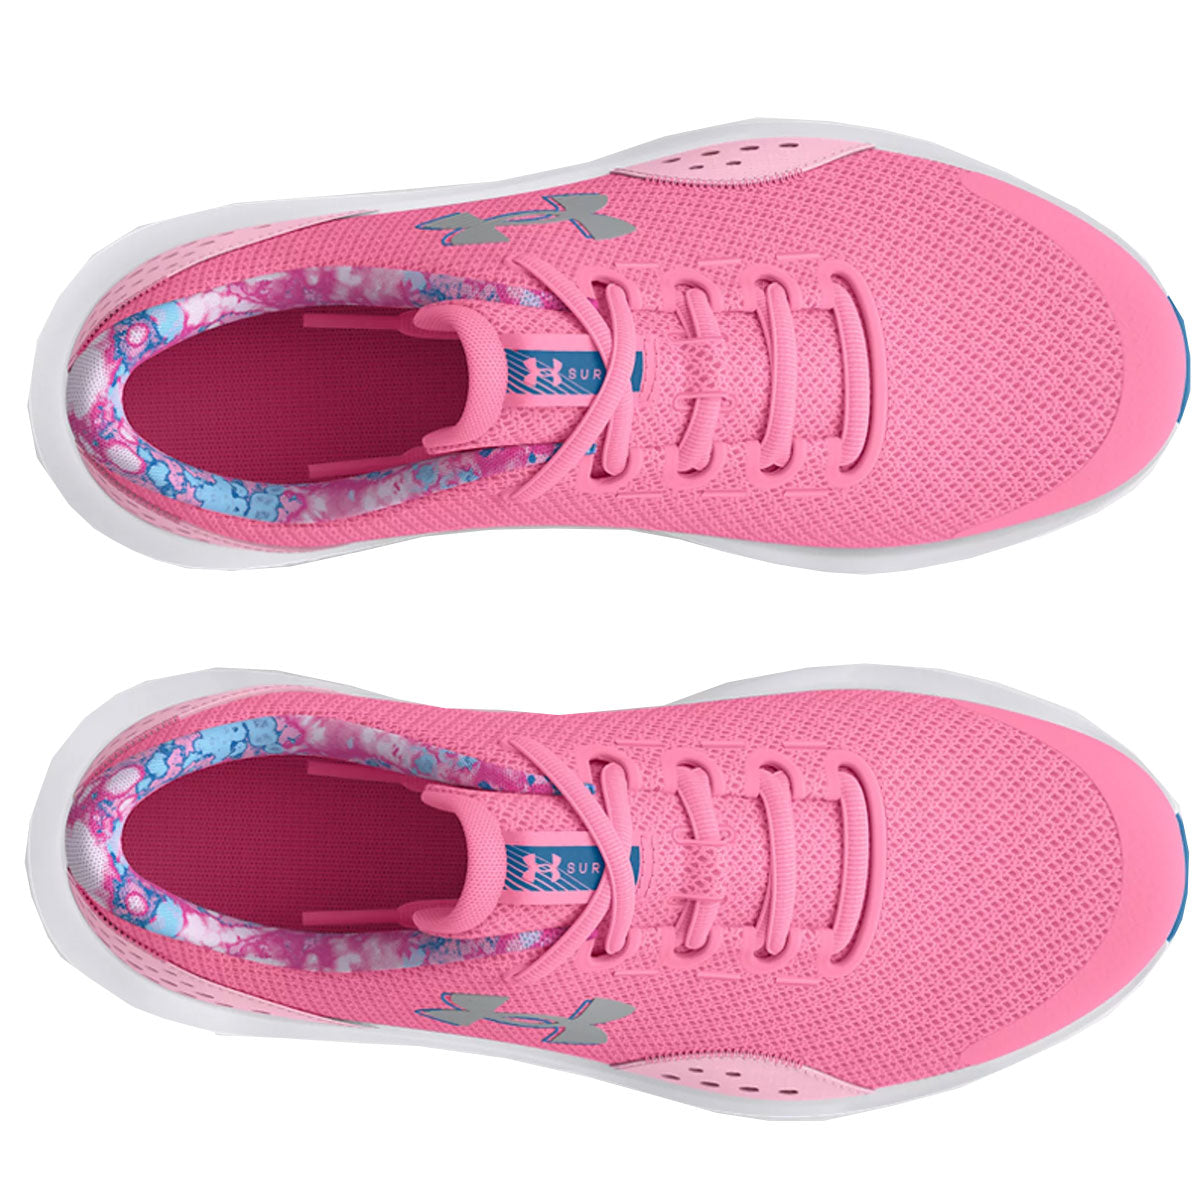 Under Armour GGS Surge 4 Print Trainers - Girls - Sunset Pink/Pink/Metallic Silver